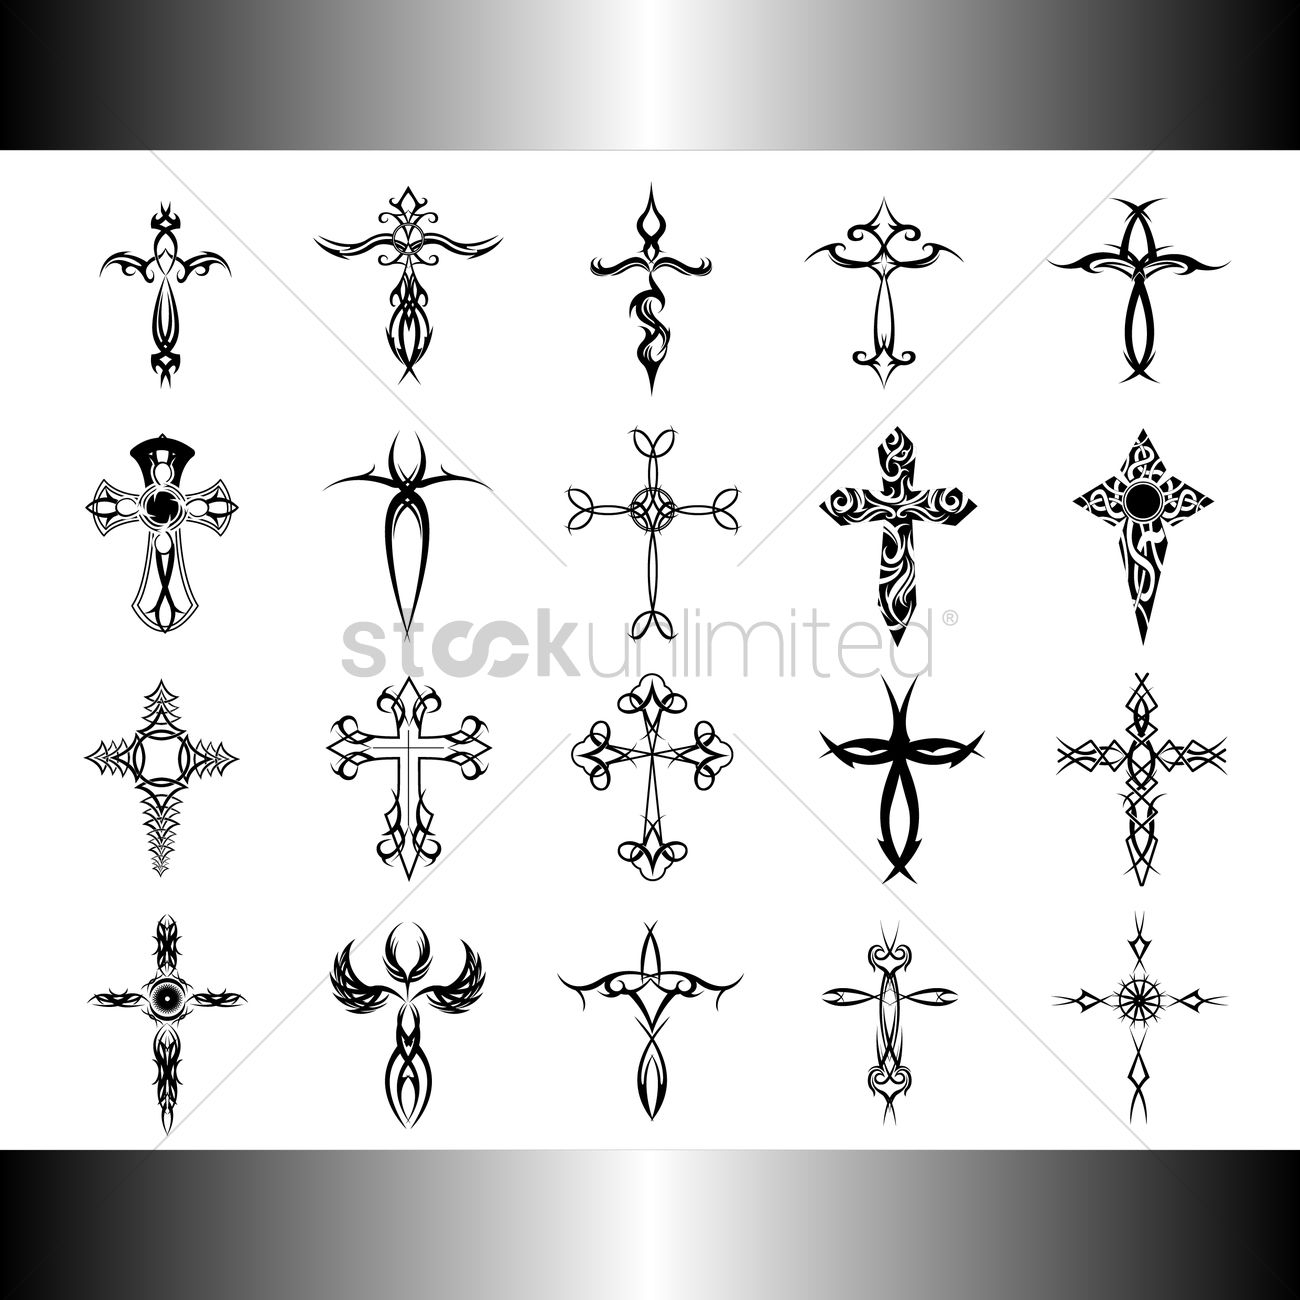 Set Of Tribal Cross Tattoos Vector Image 1524230 Stockunlimited for size 1300 X 1300